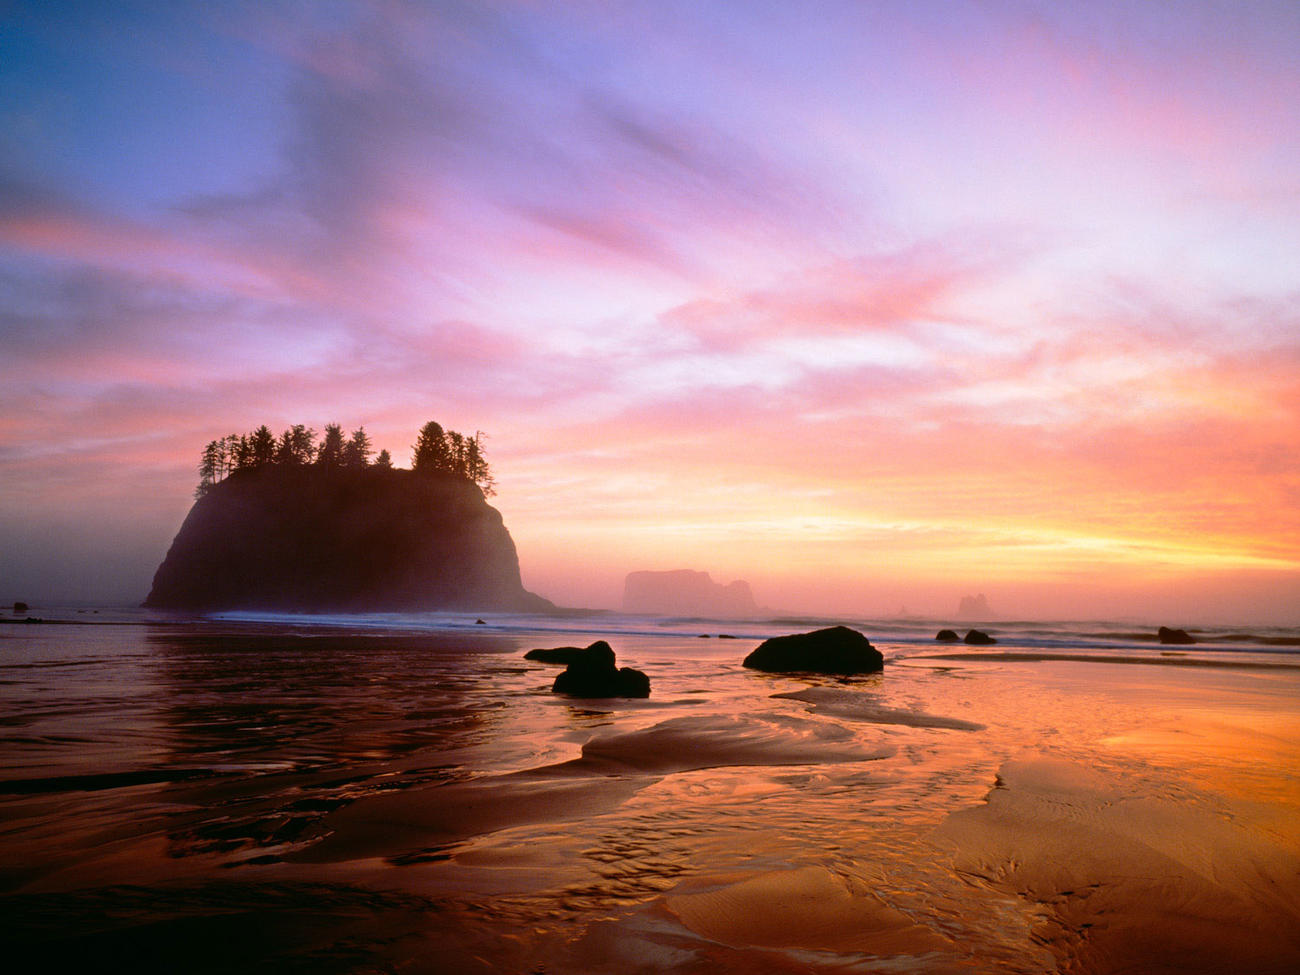 The 8 Destinations You Must See in Washington’s Olympic National Park